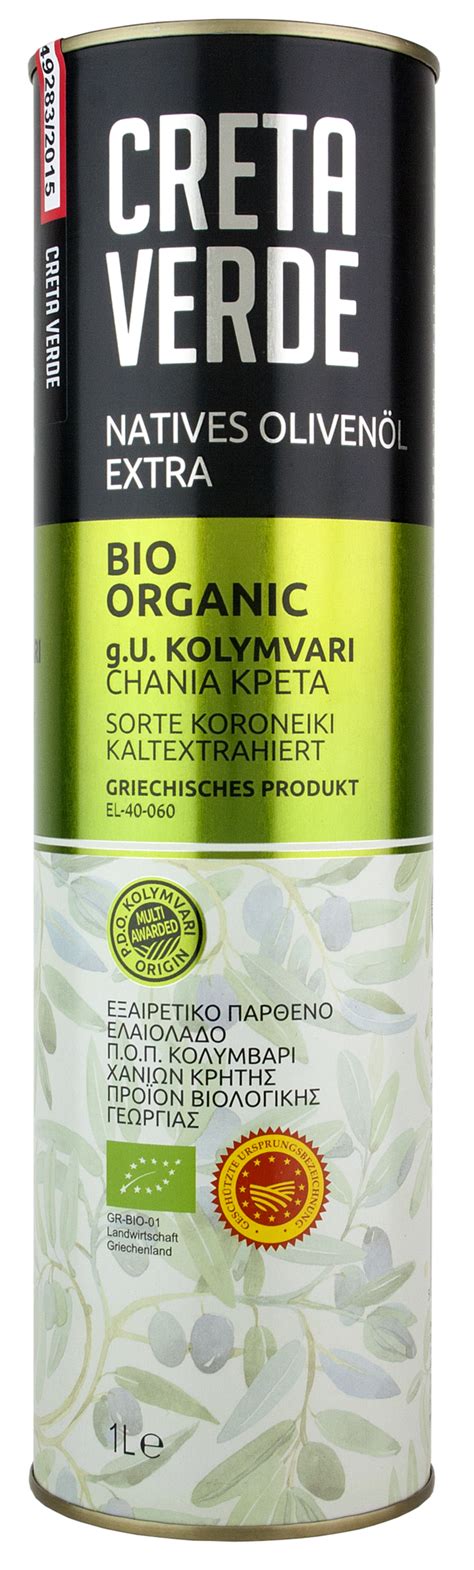 Furthermore, the ingredients are purely organic, containing no artificial materials. . Creta verde olive oil review